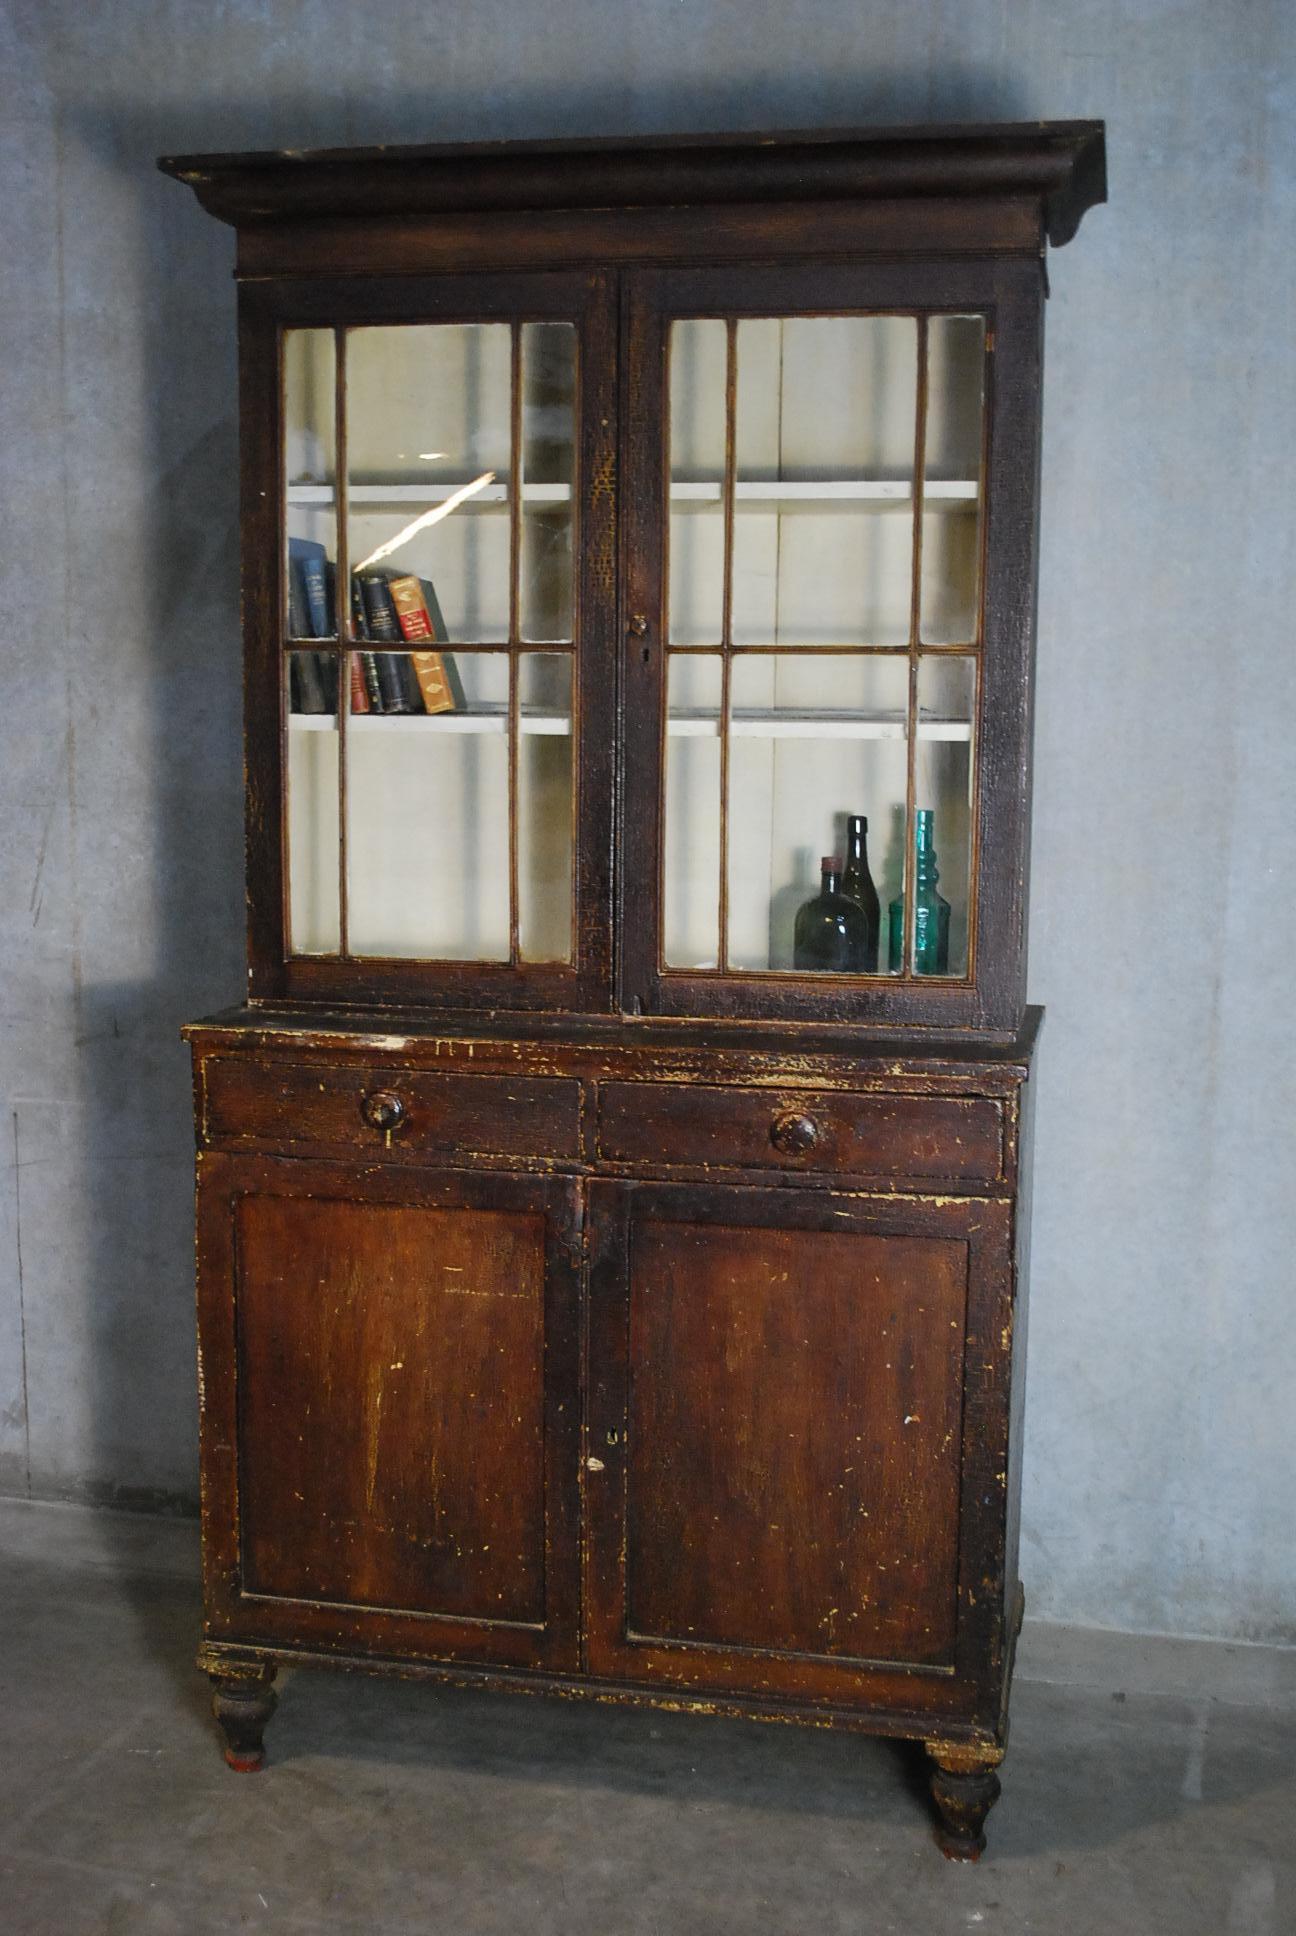 Very nice two-piece country cupboard in original untouched age cracked painted surface. This piece is a perfect preserved antique piece,
Farm fresh.